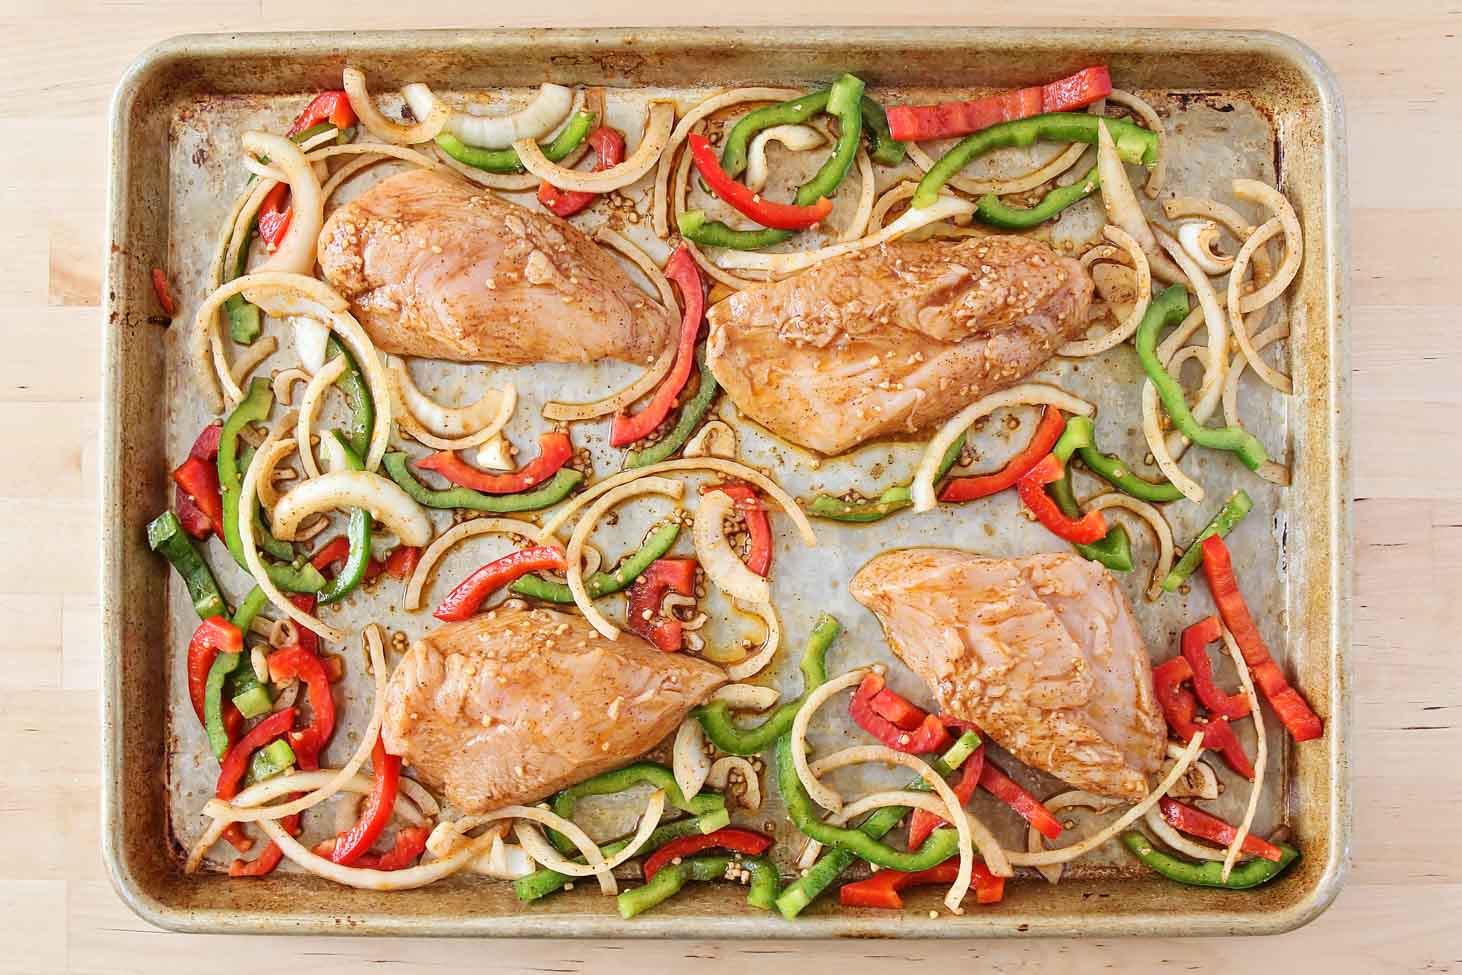 Marinated chicken and vegetable slices on a sheet pan.